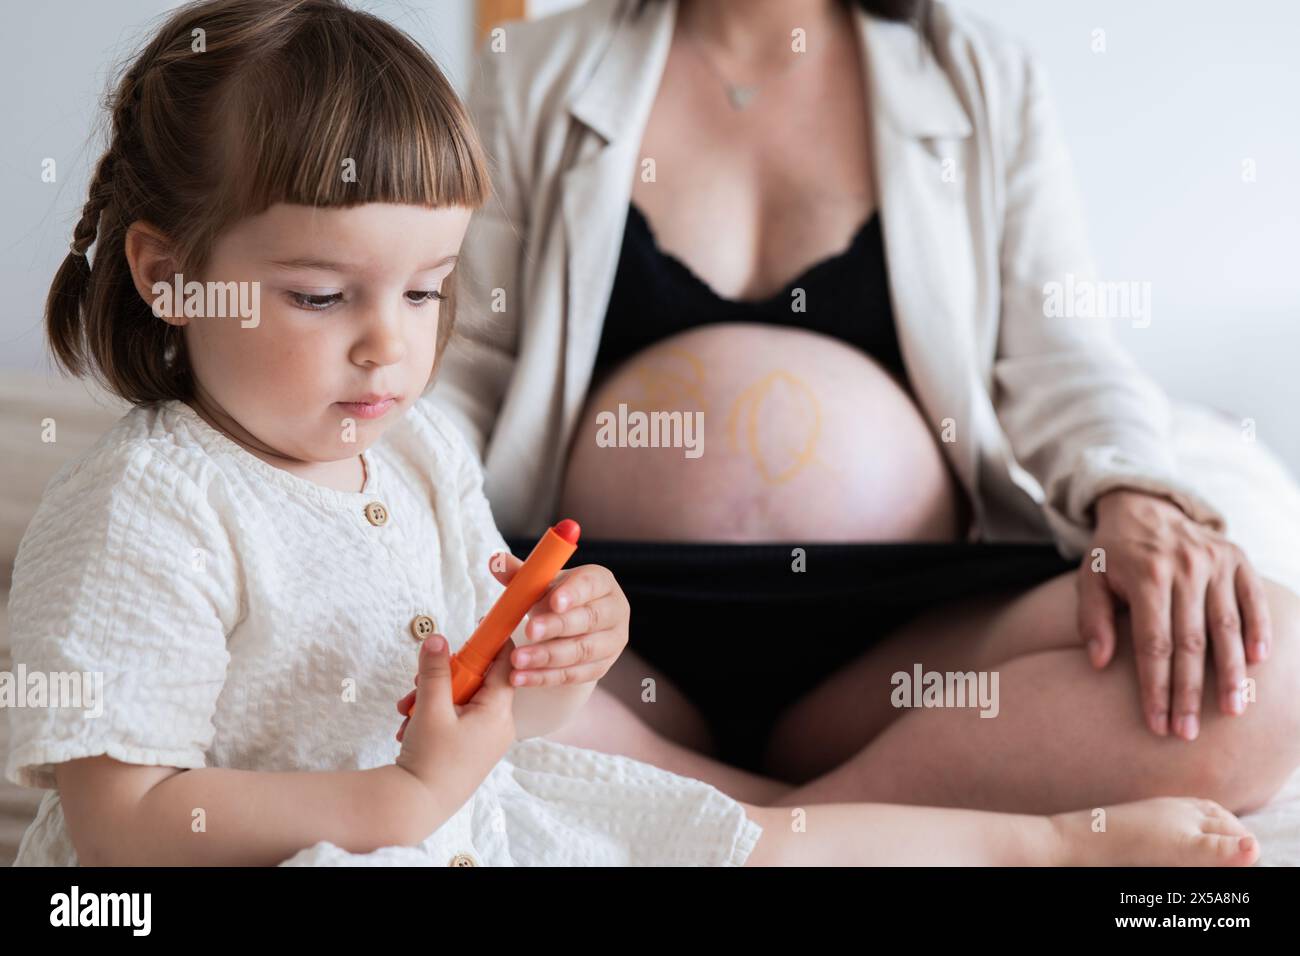 Little girl drawing a heart on her expecting mothers belly, expressing love and sibling bond Stock Photo